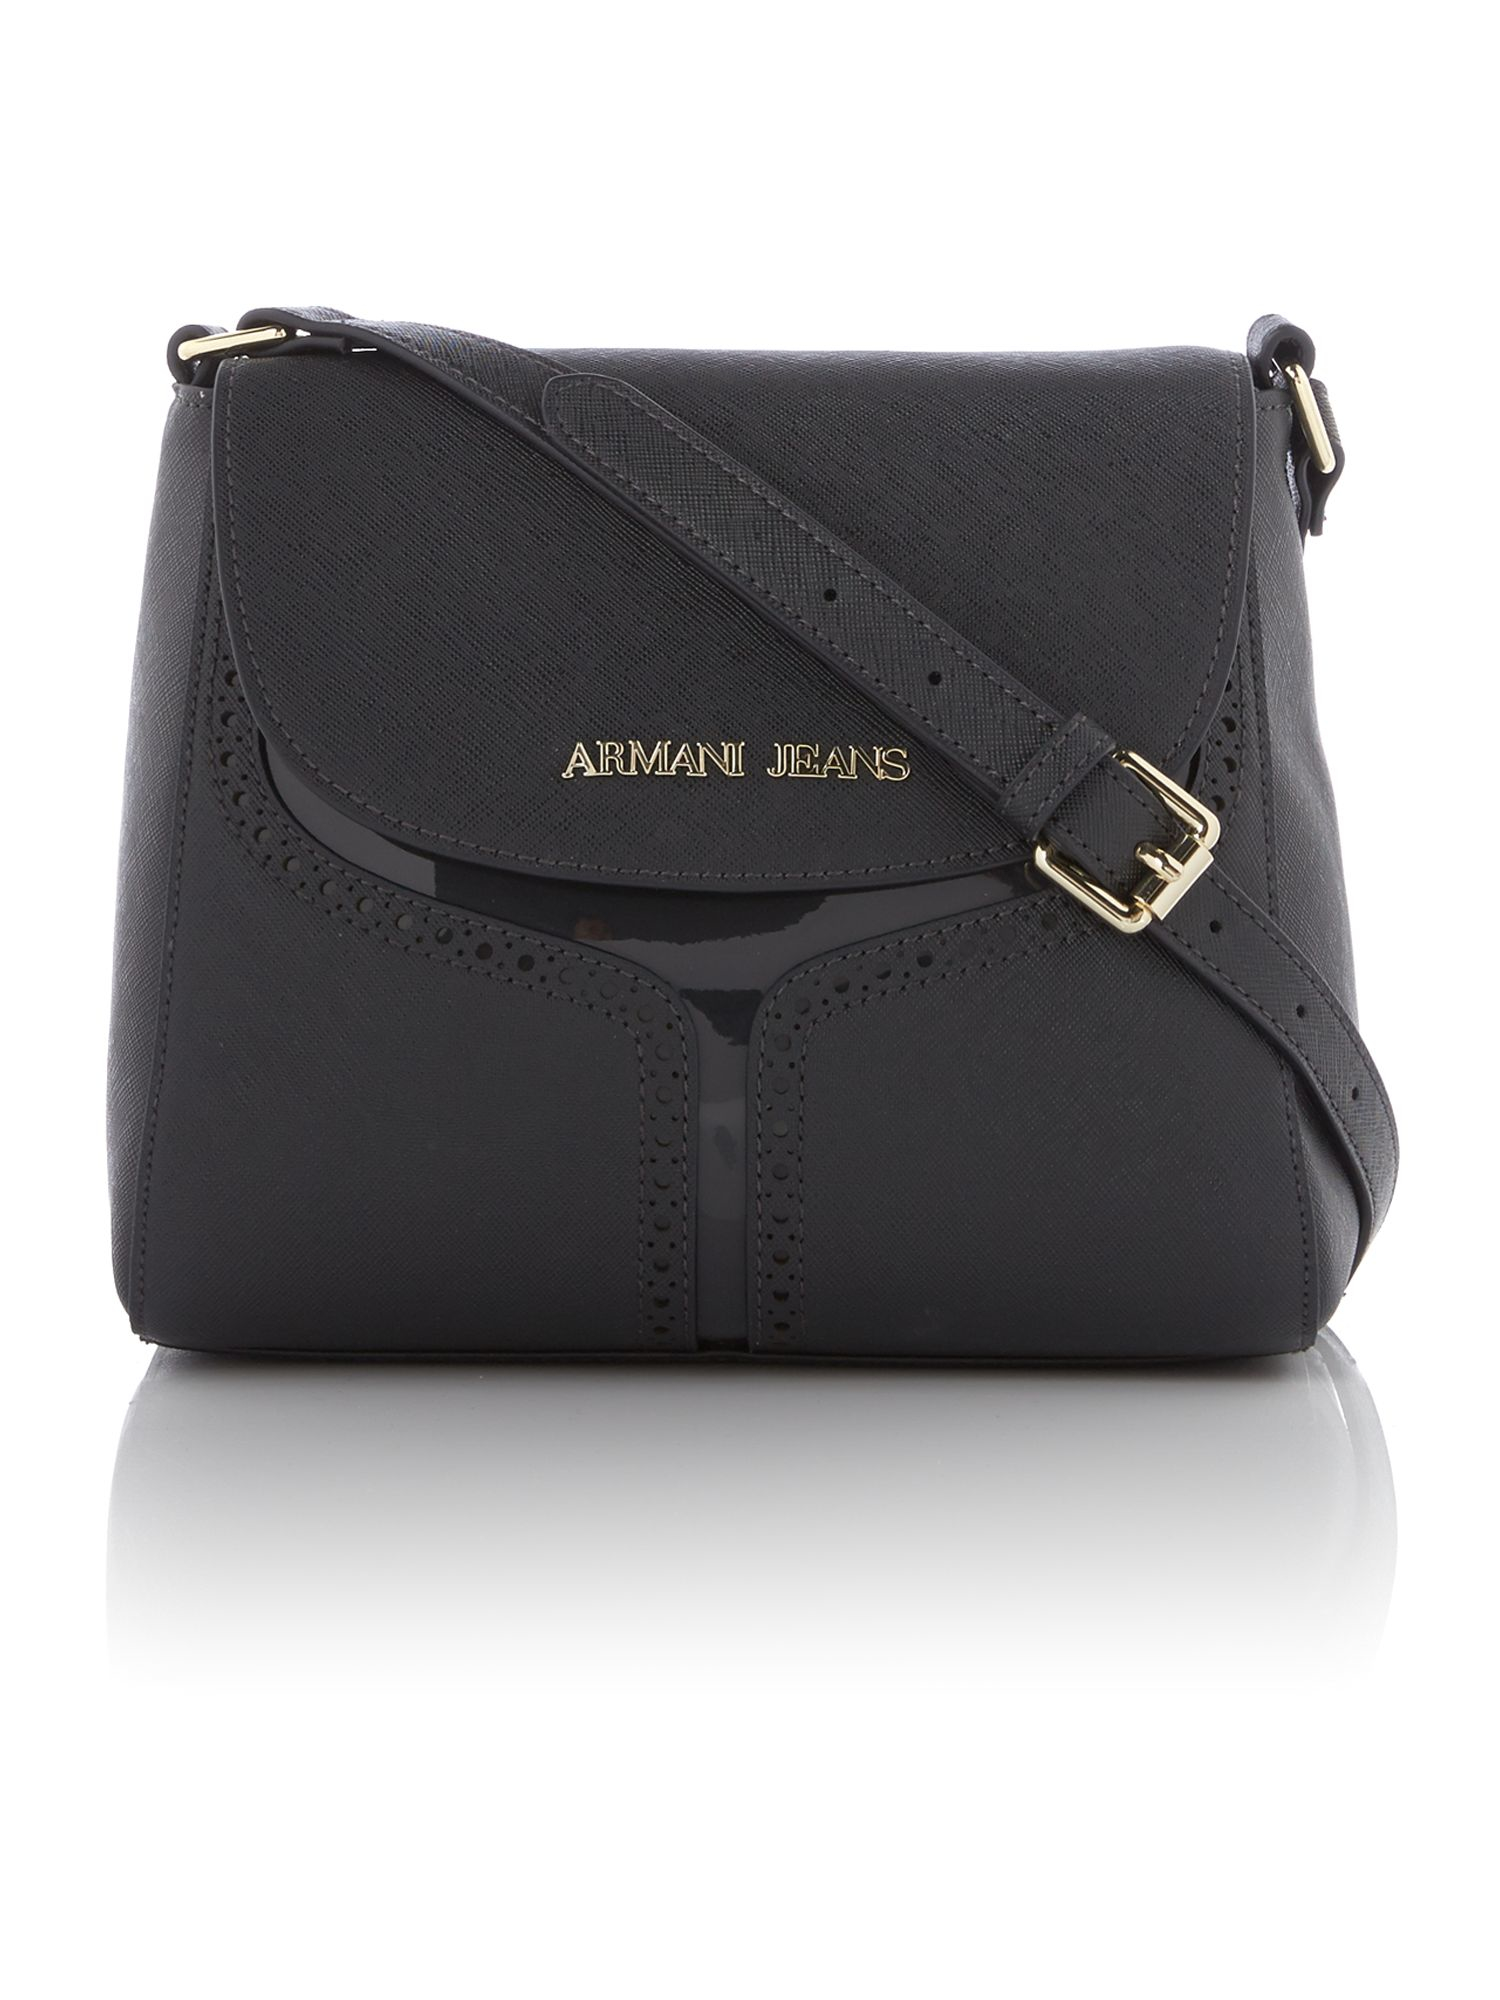 Armani Jeans Navy Small Cross Body Bag in Blue - Lyst